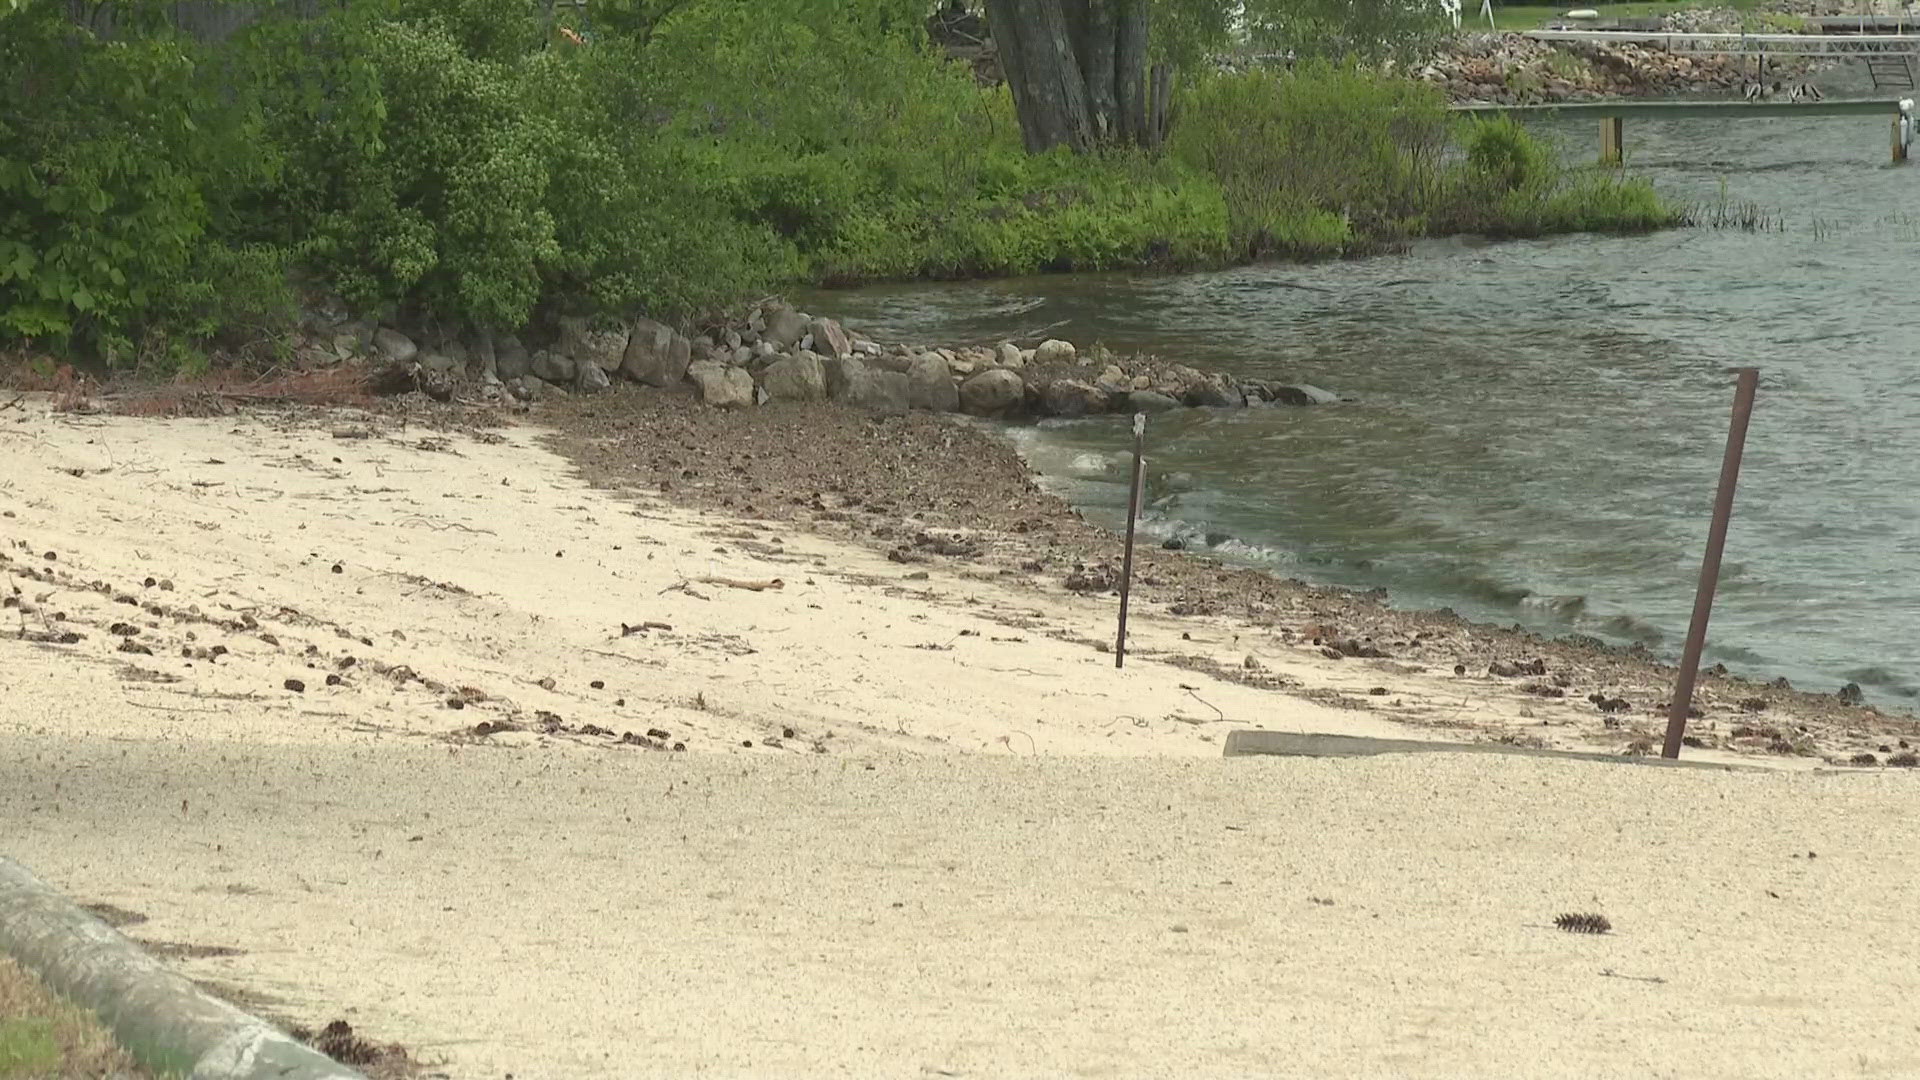 Although a tough decision, the owners hope the beach can continue to be made available to the public in its future.